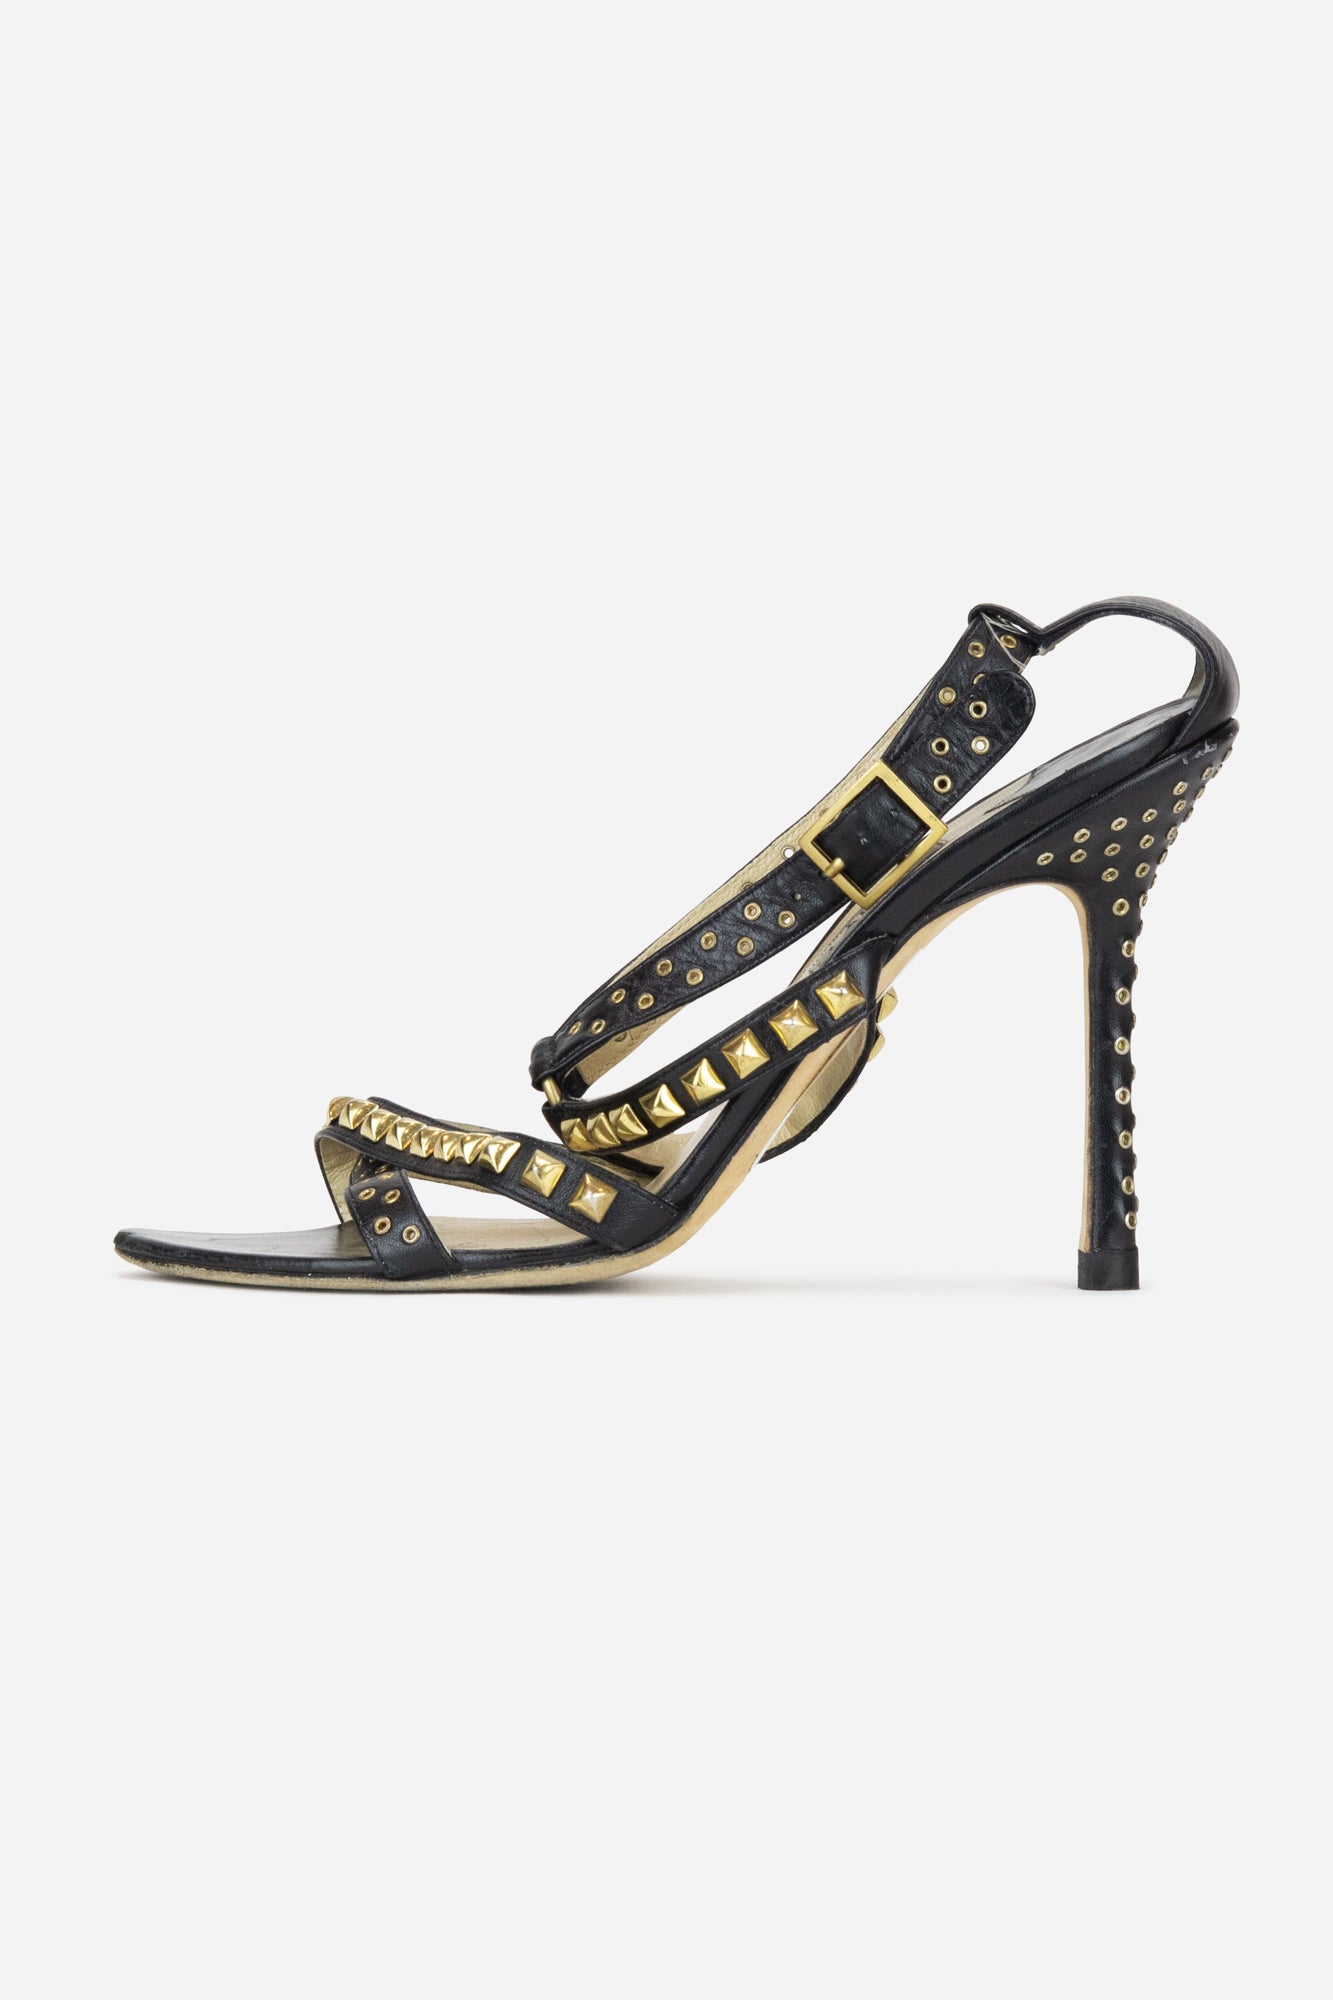 Black Leather Strappy Sandals with Gold Studded Details - So Over It Luxury Consignment